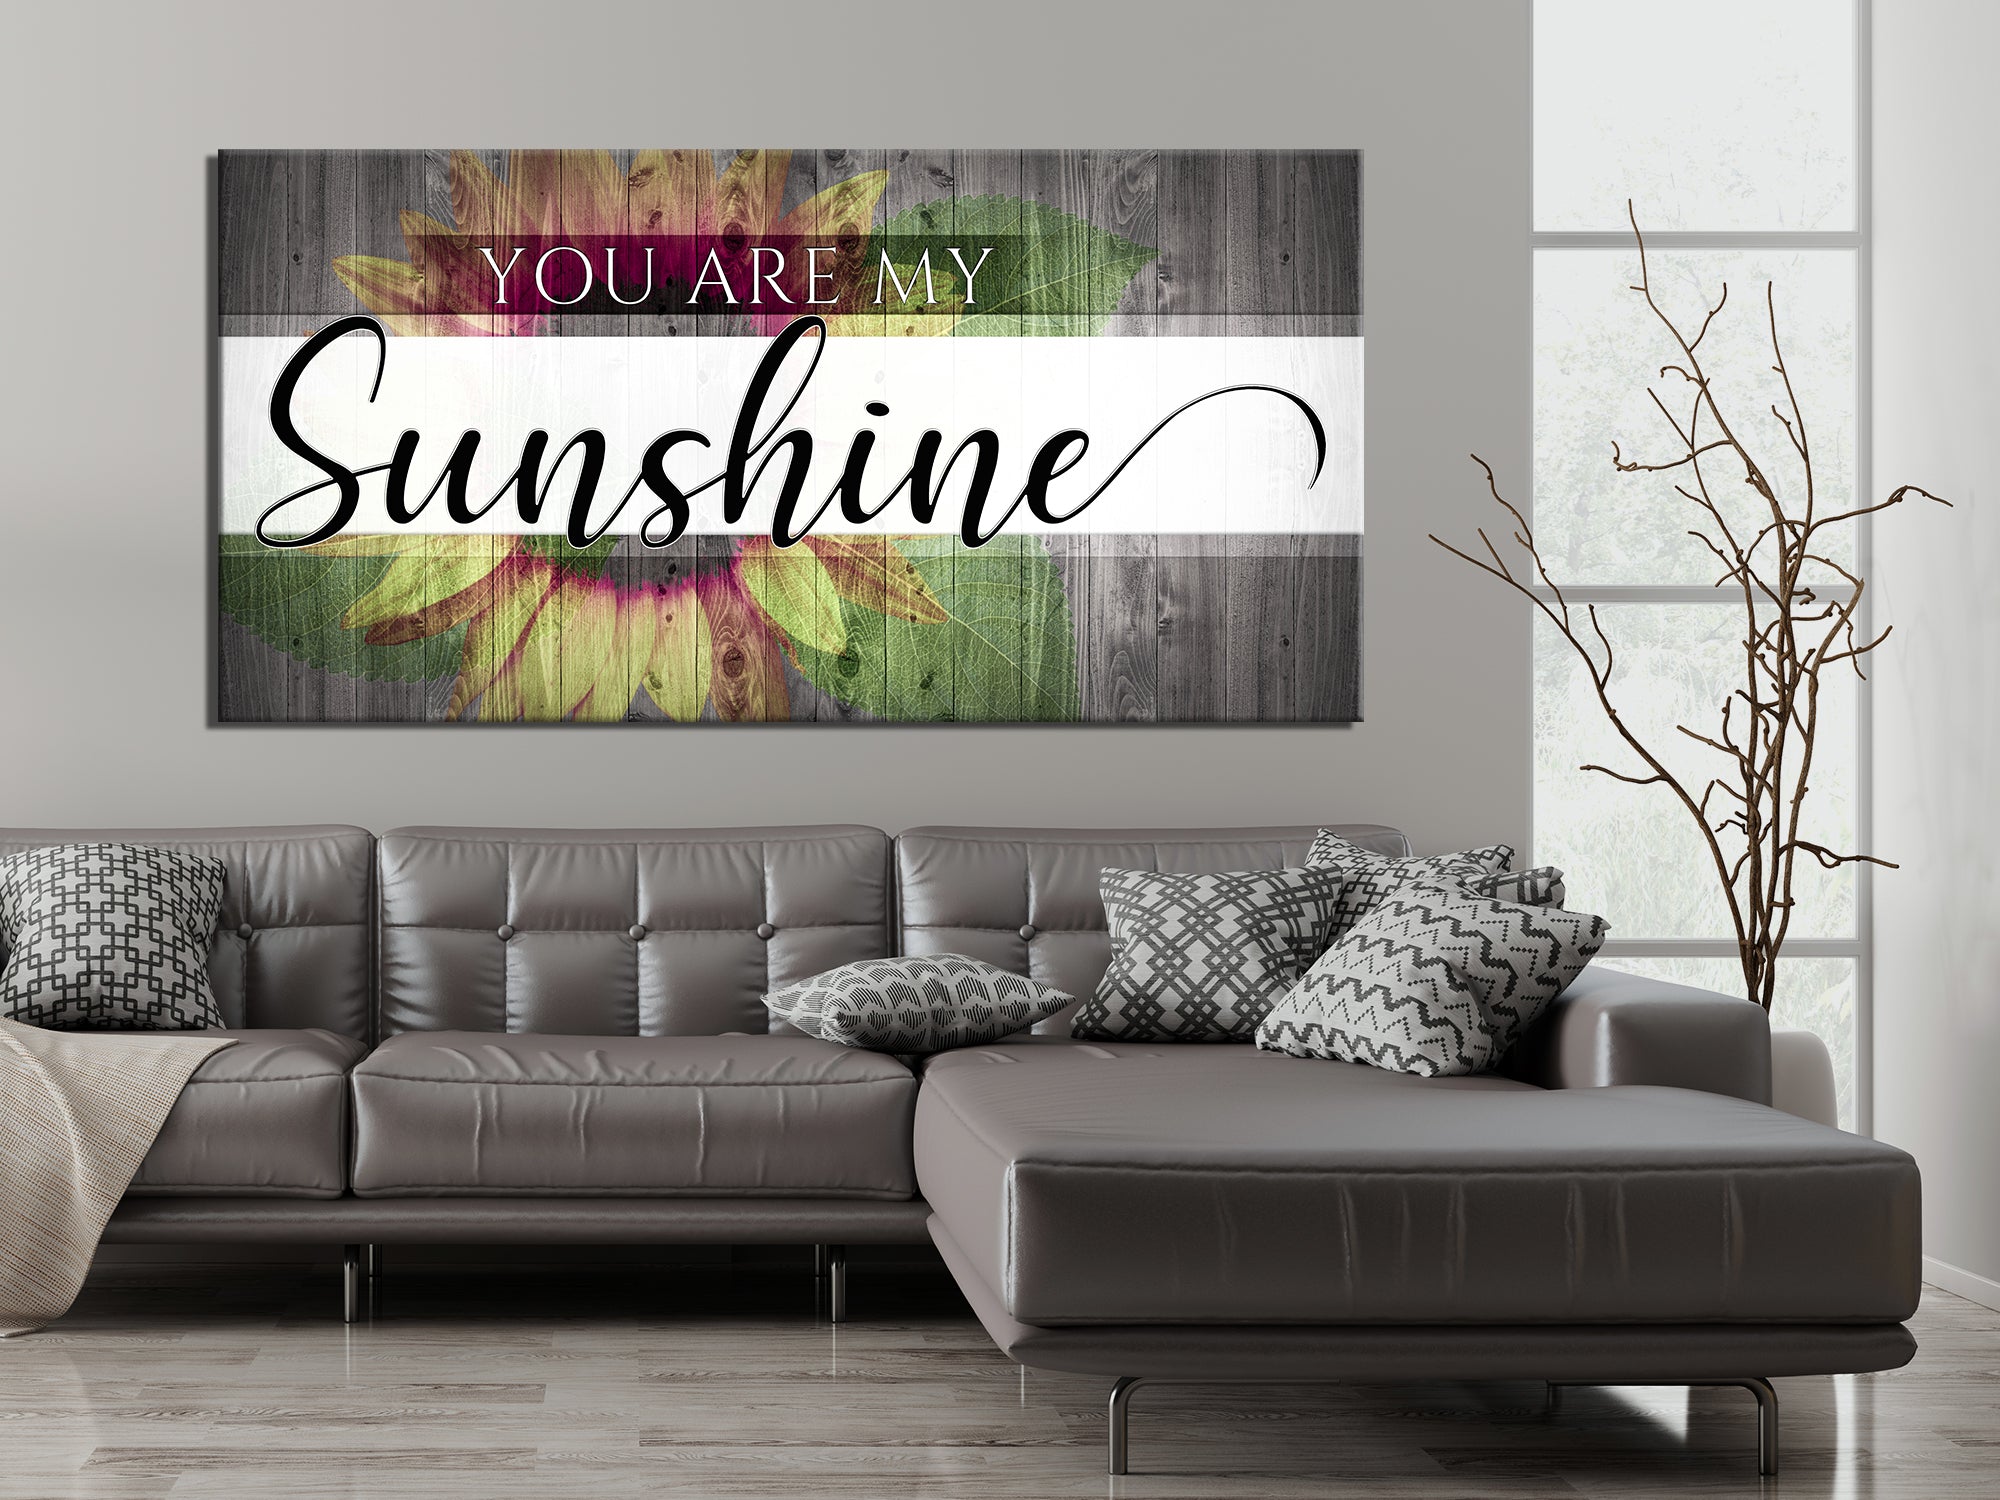 You Are My Sunshine - Bedroom - Canvas Wall Art